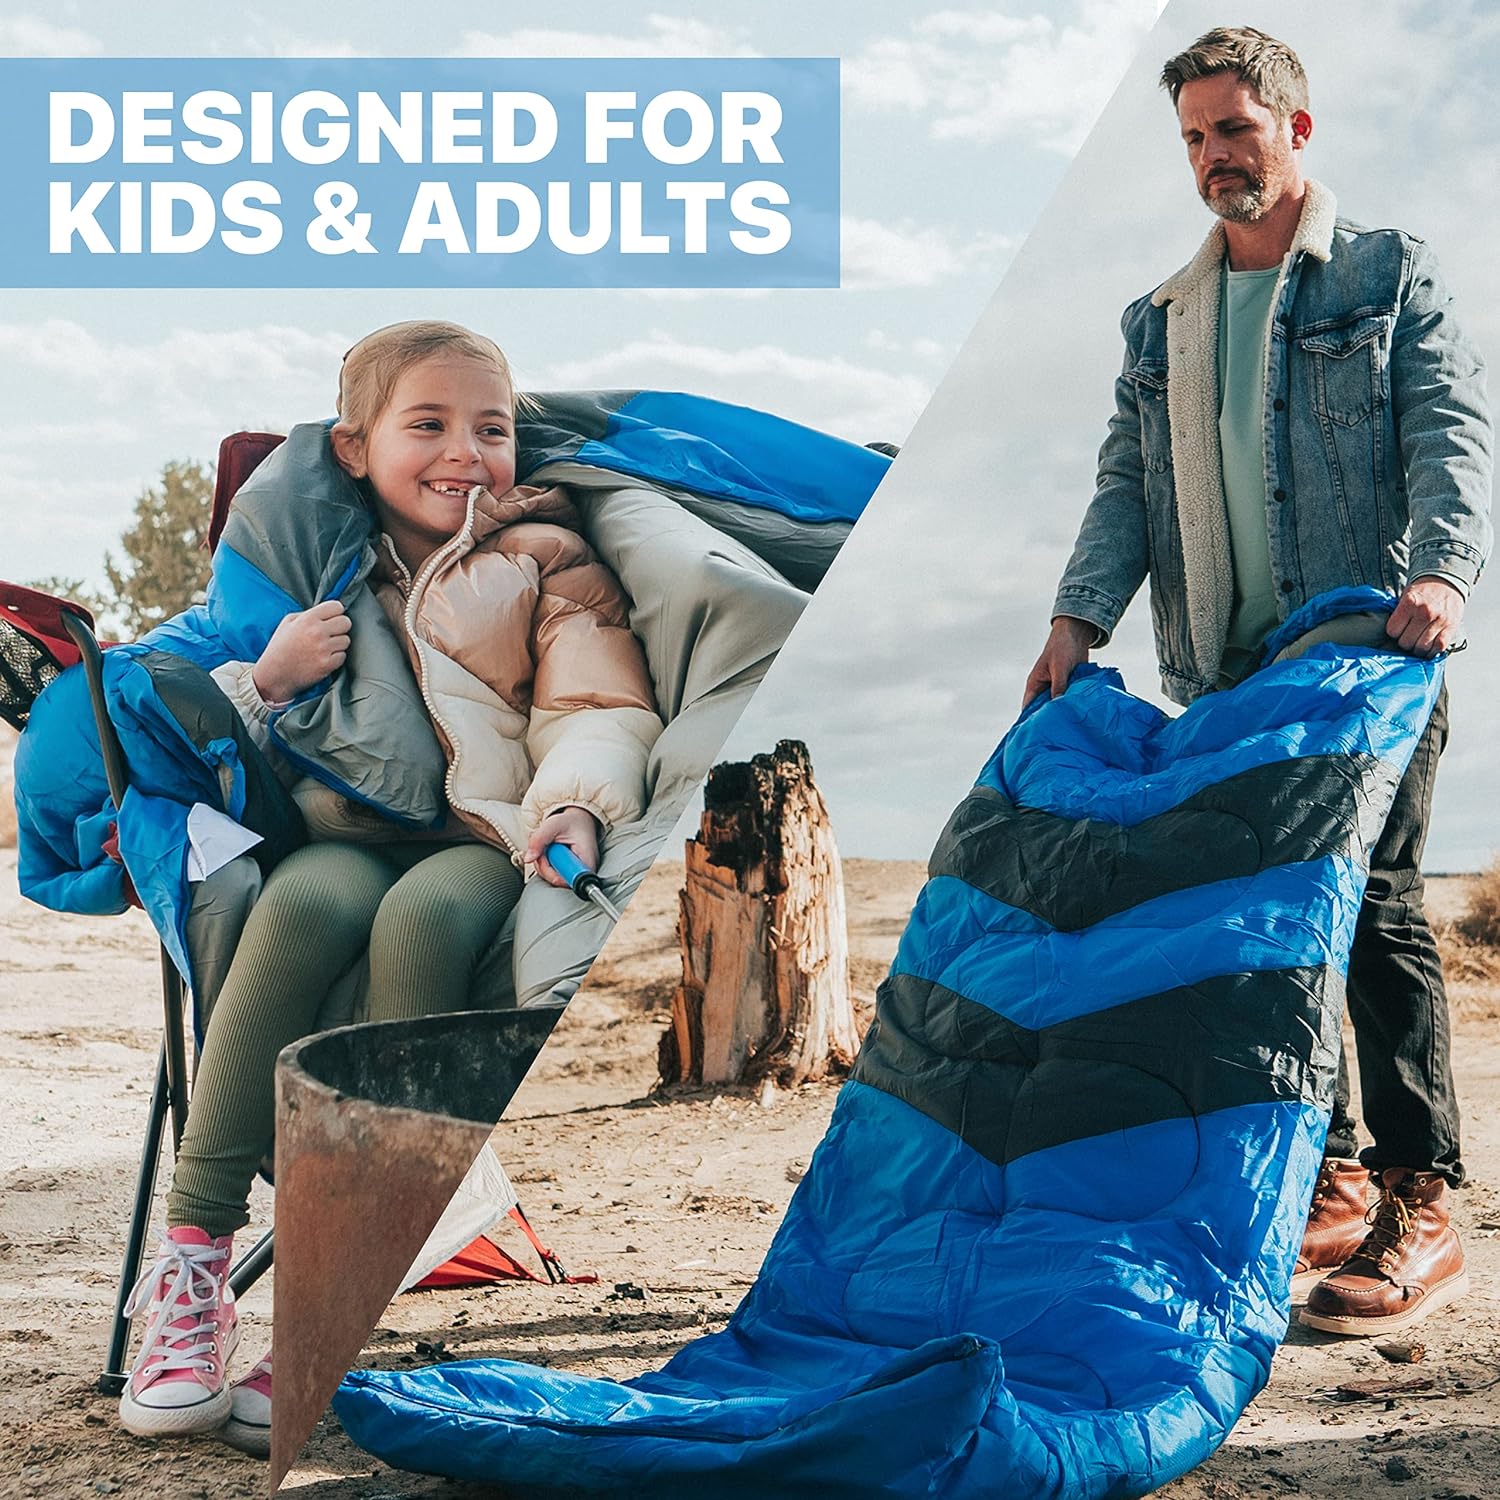 Sleeping Bags for Adults Cold Weather & Warm - Backpacking Camping Sleeping Bag for Kids 10-12, Girls, Boys - Lightweight Compact Camping Gear Must Haves Hiking Essentials Sleep Accessories